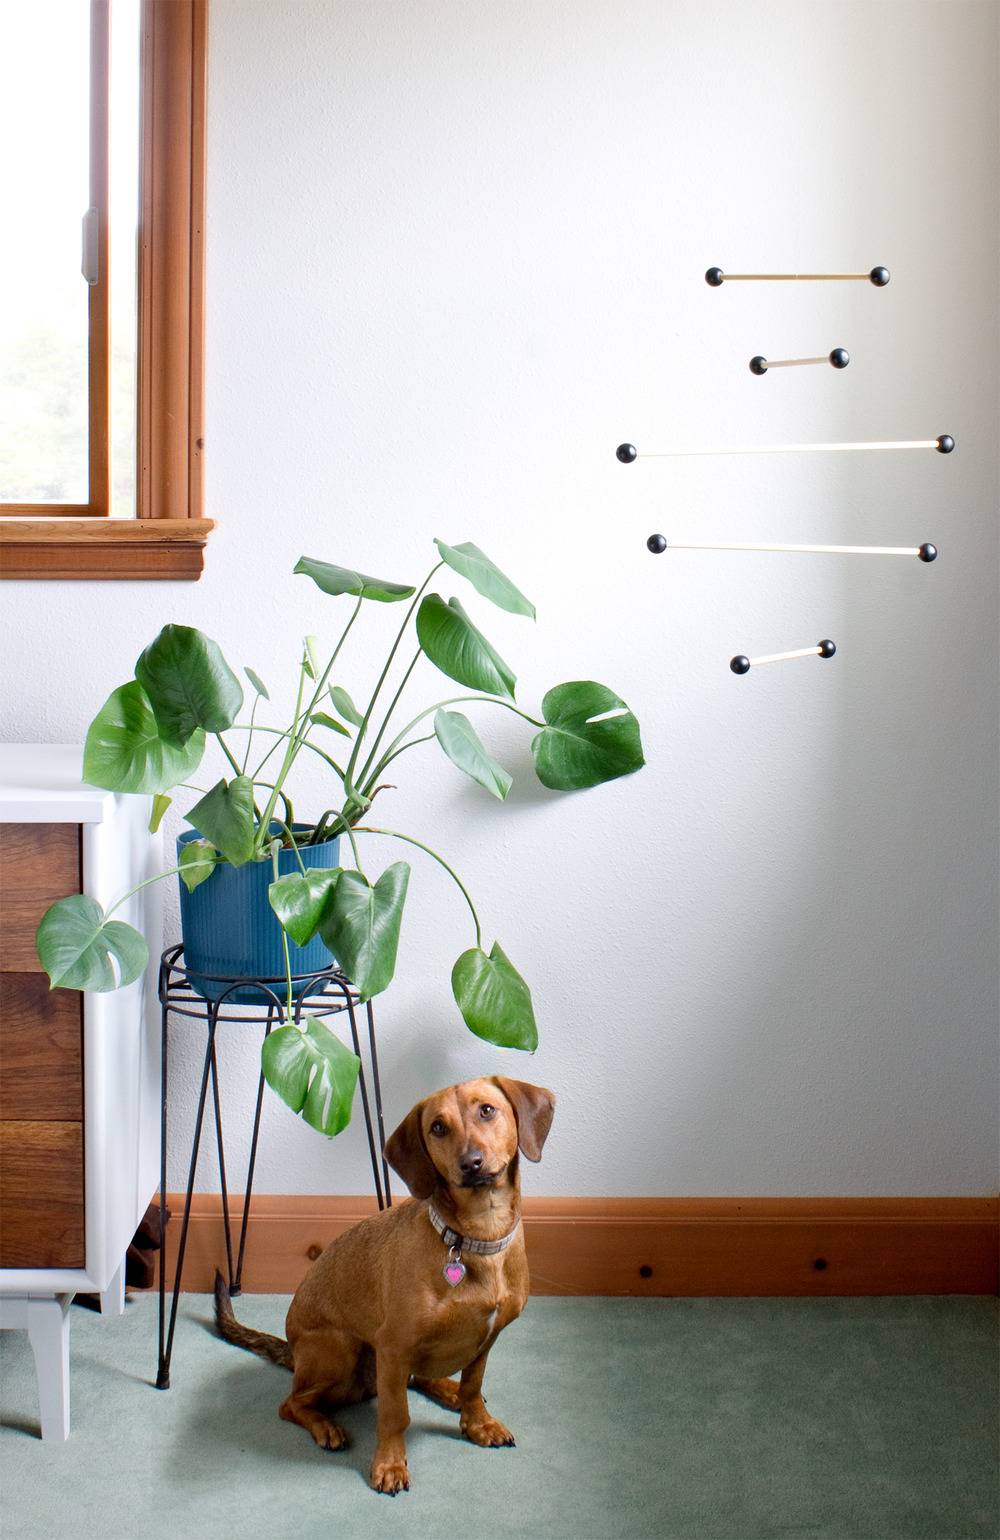 A dog sitting underneath a potted plant.